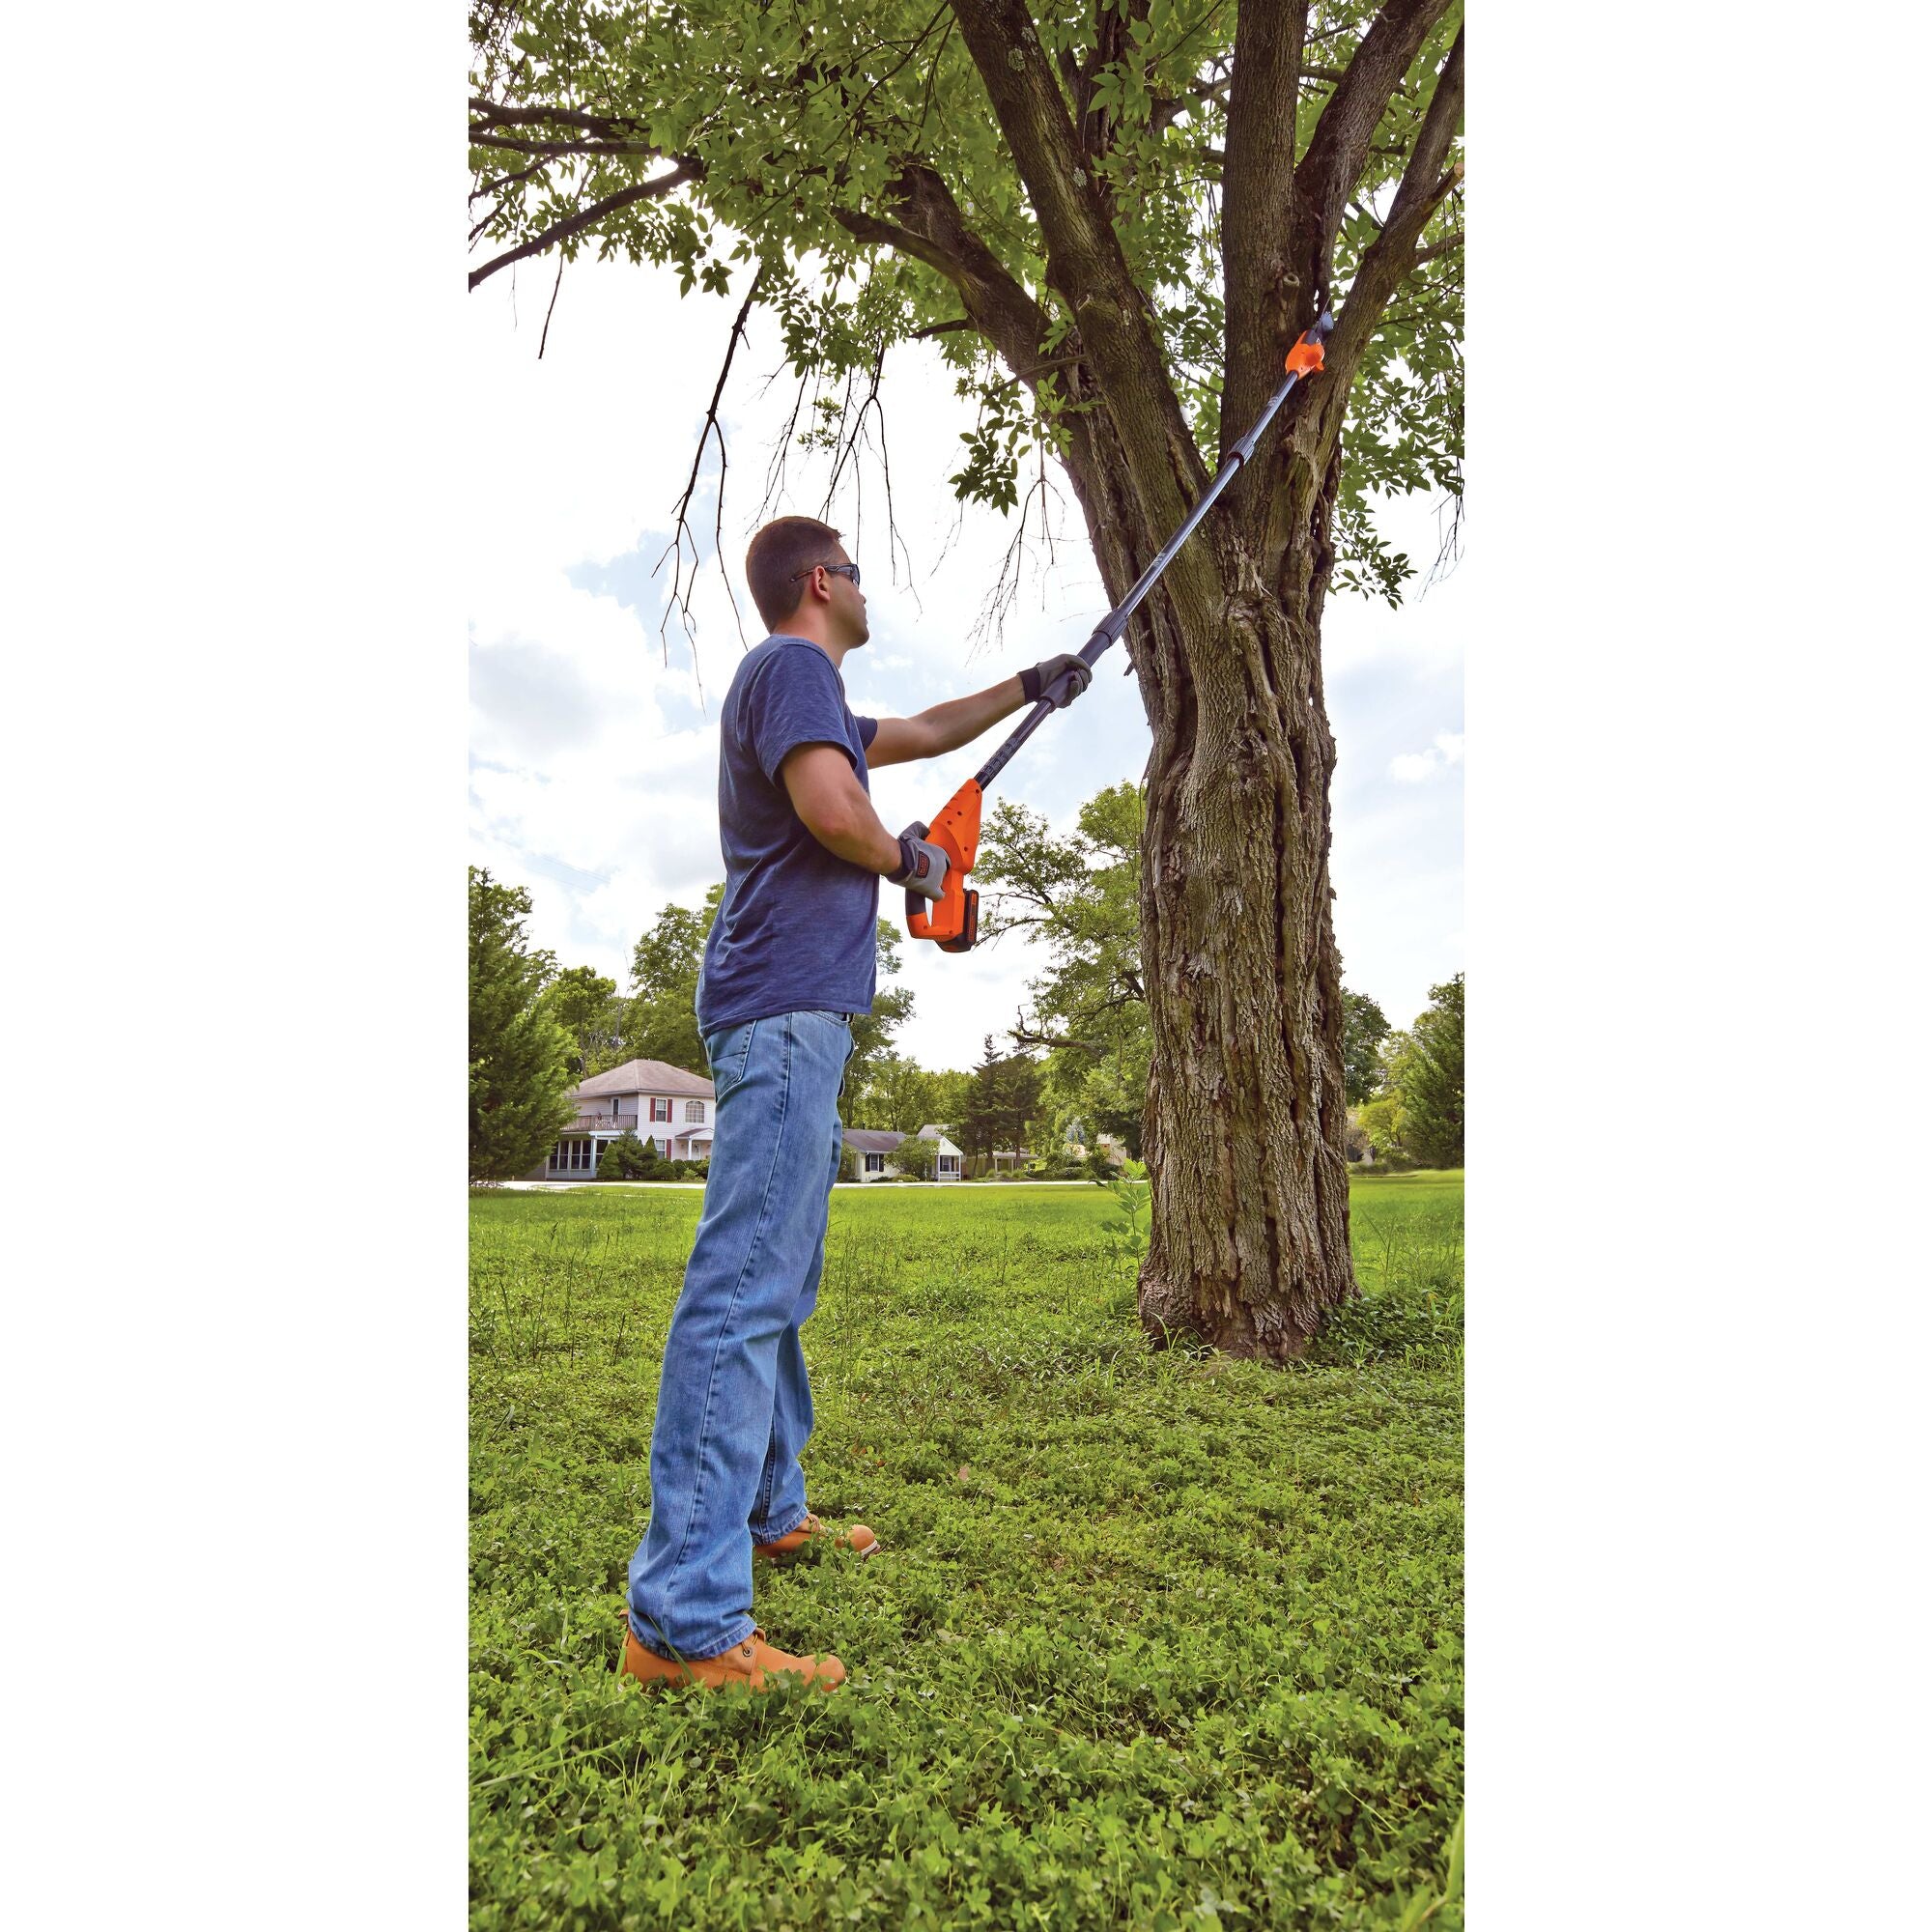 Cordless 20V 10' Pruning Tree Trimming Saw by Black+Decker Review 